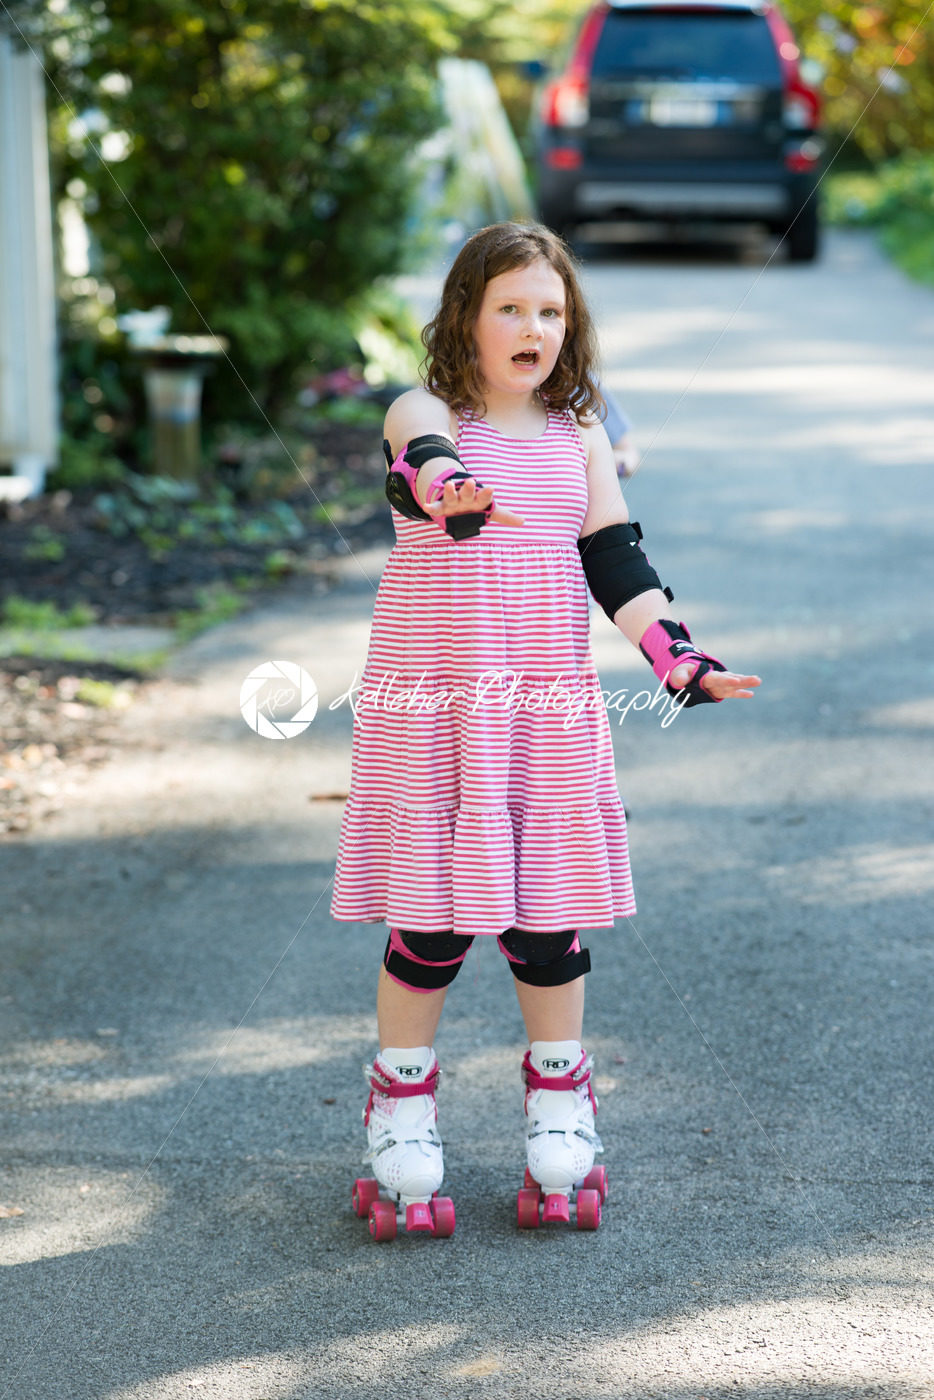 Young girl outside learning to riding on roller skates on driveway wearing protective elbow, wrist and knee pads - Kelleher Photography Store